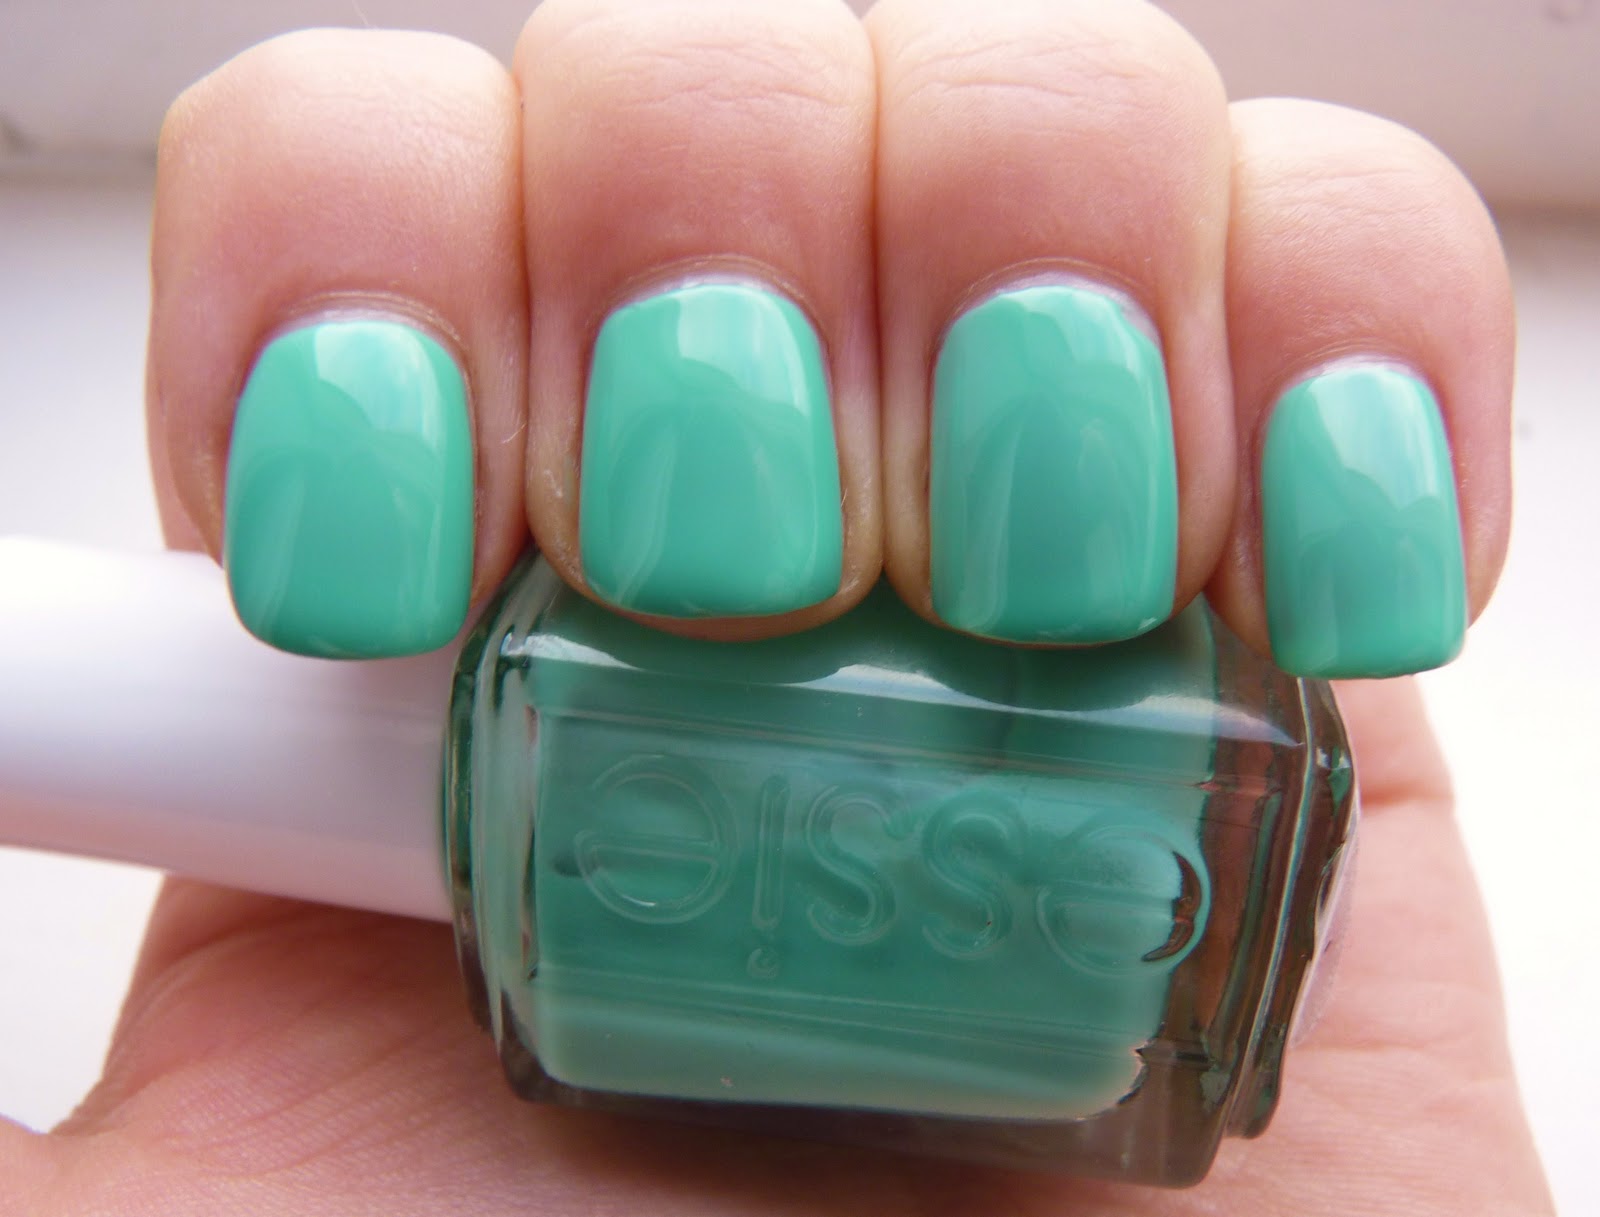 2. Essie Nail Polish in "Turquoise & Caicos" - wide 6